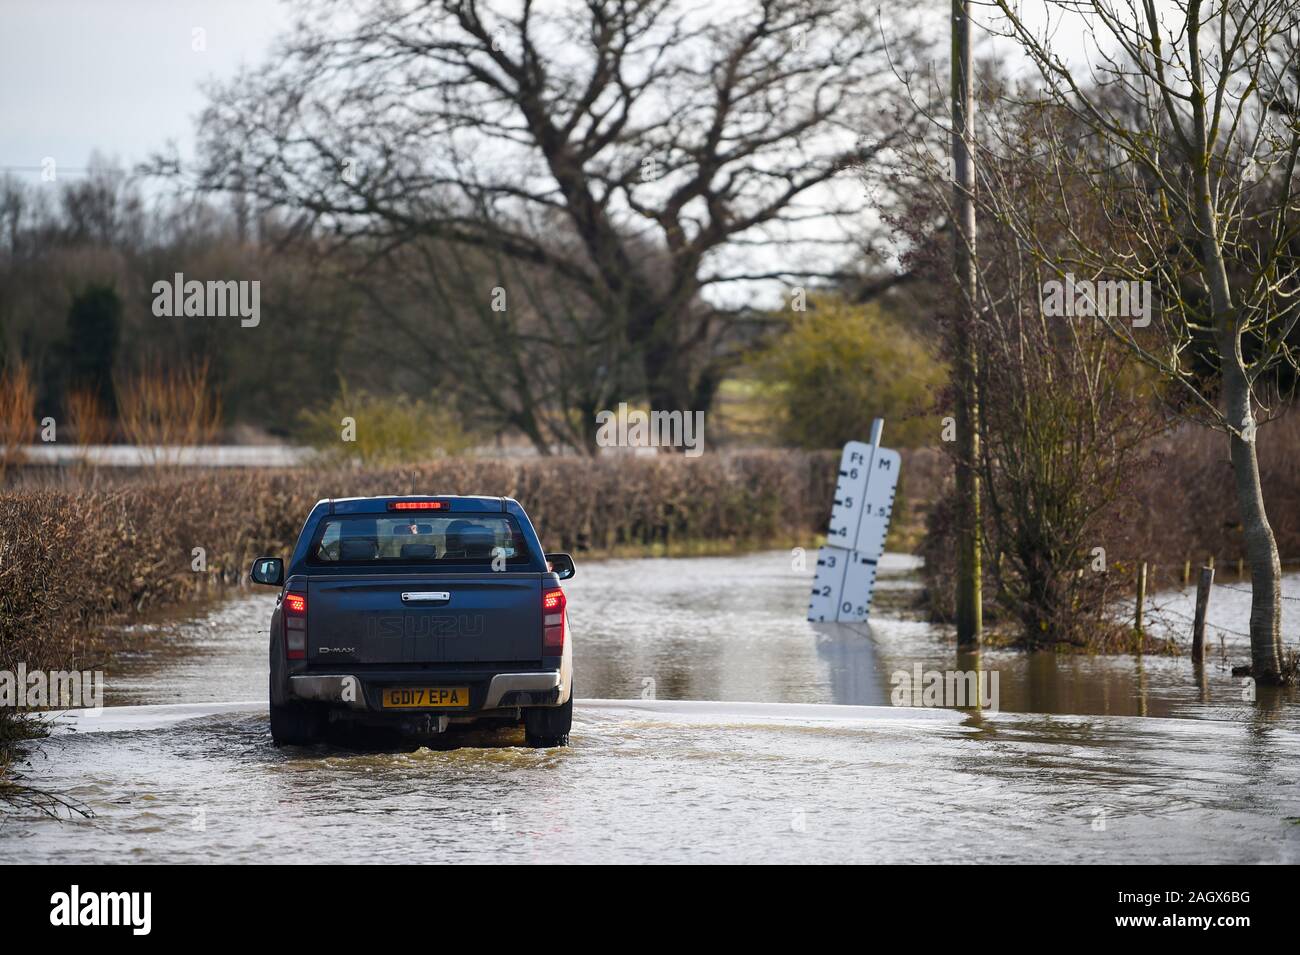 Lewes UK 22nd December 2019 - A car negotiates a flooded road in the village of Barcombe Mills near Lewes as more weather and flood warnings have been issued across Britain after days of rain : Credit Simon Dack / Alamy Live News Stock Photo